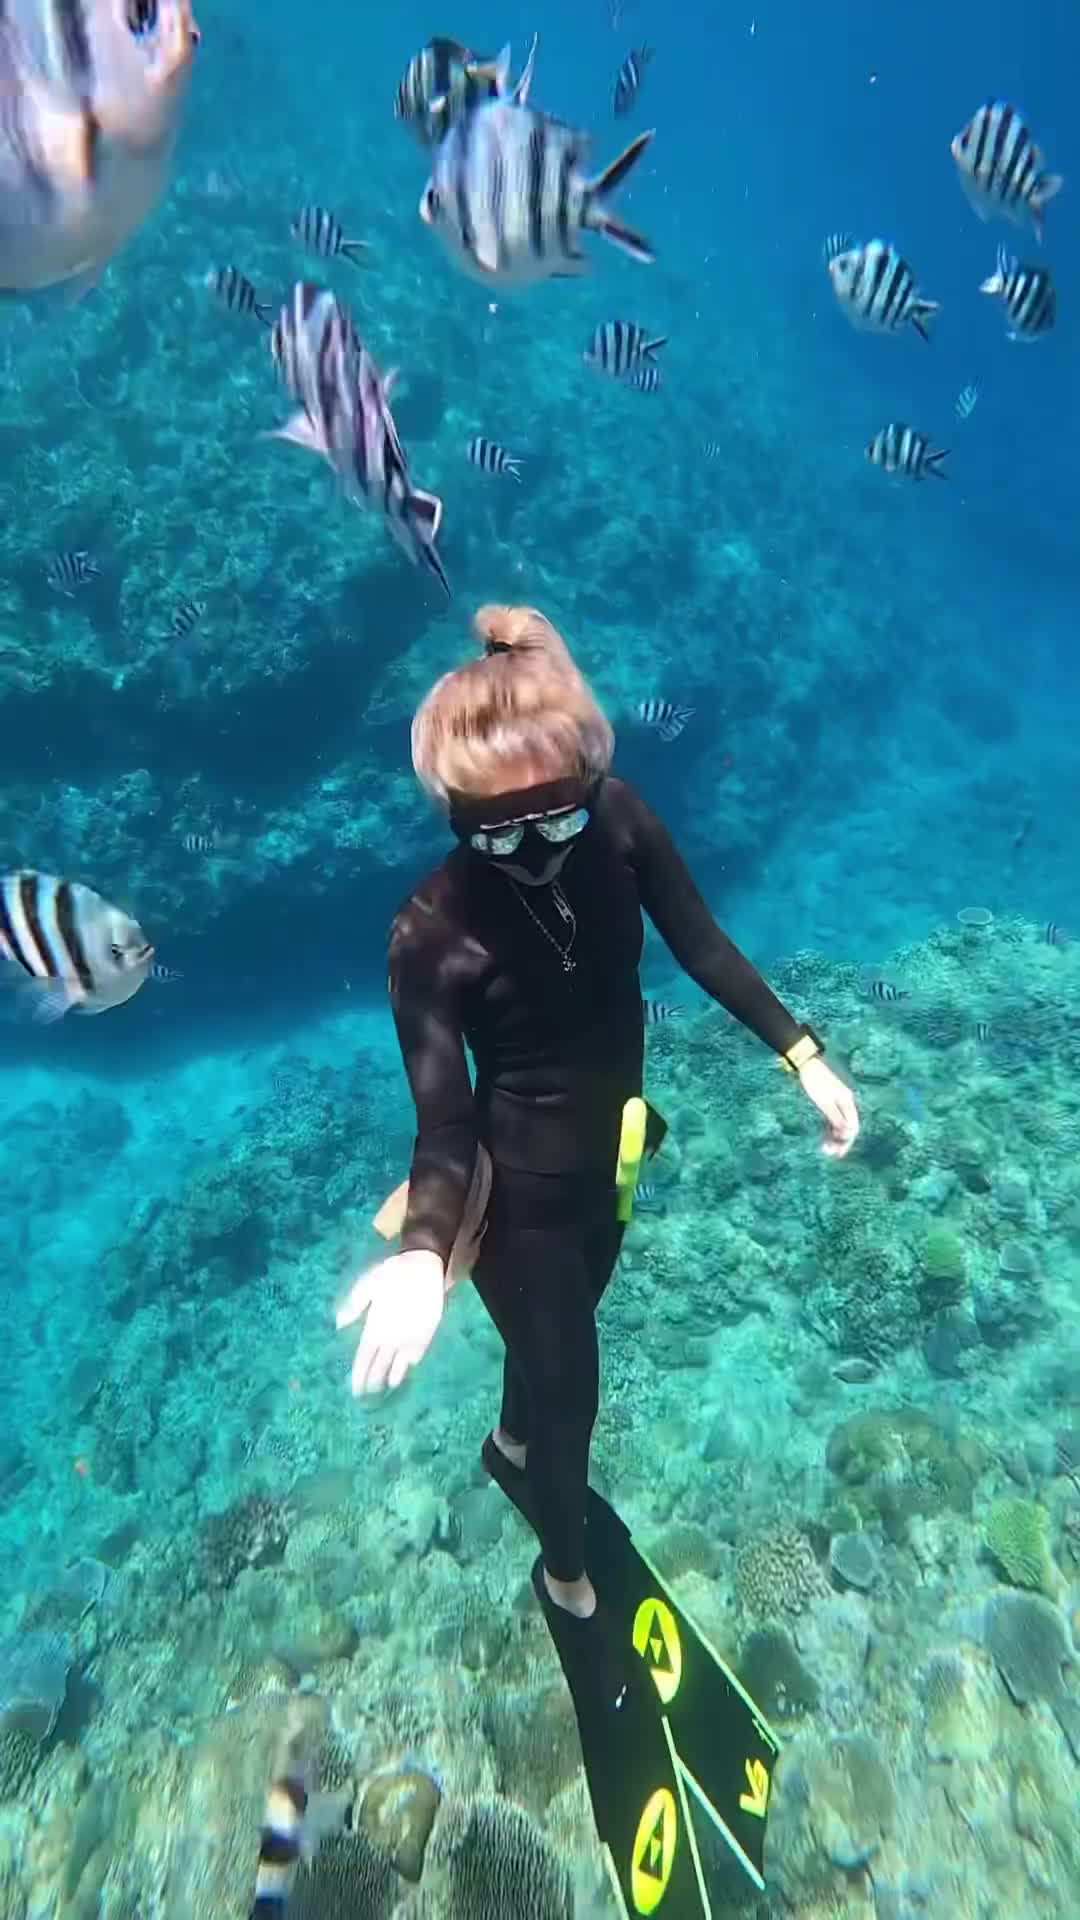 Joyful Dive with Fish in Okinawa's Coral Reefs